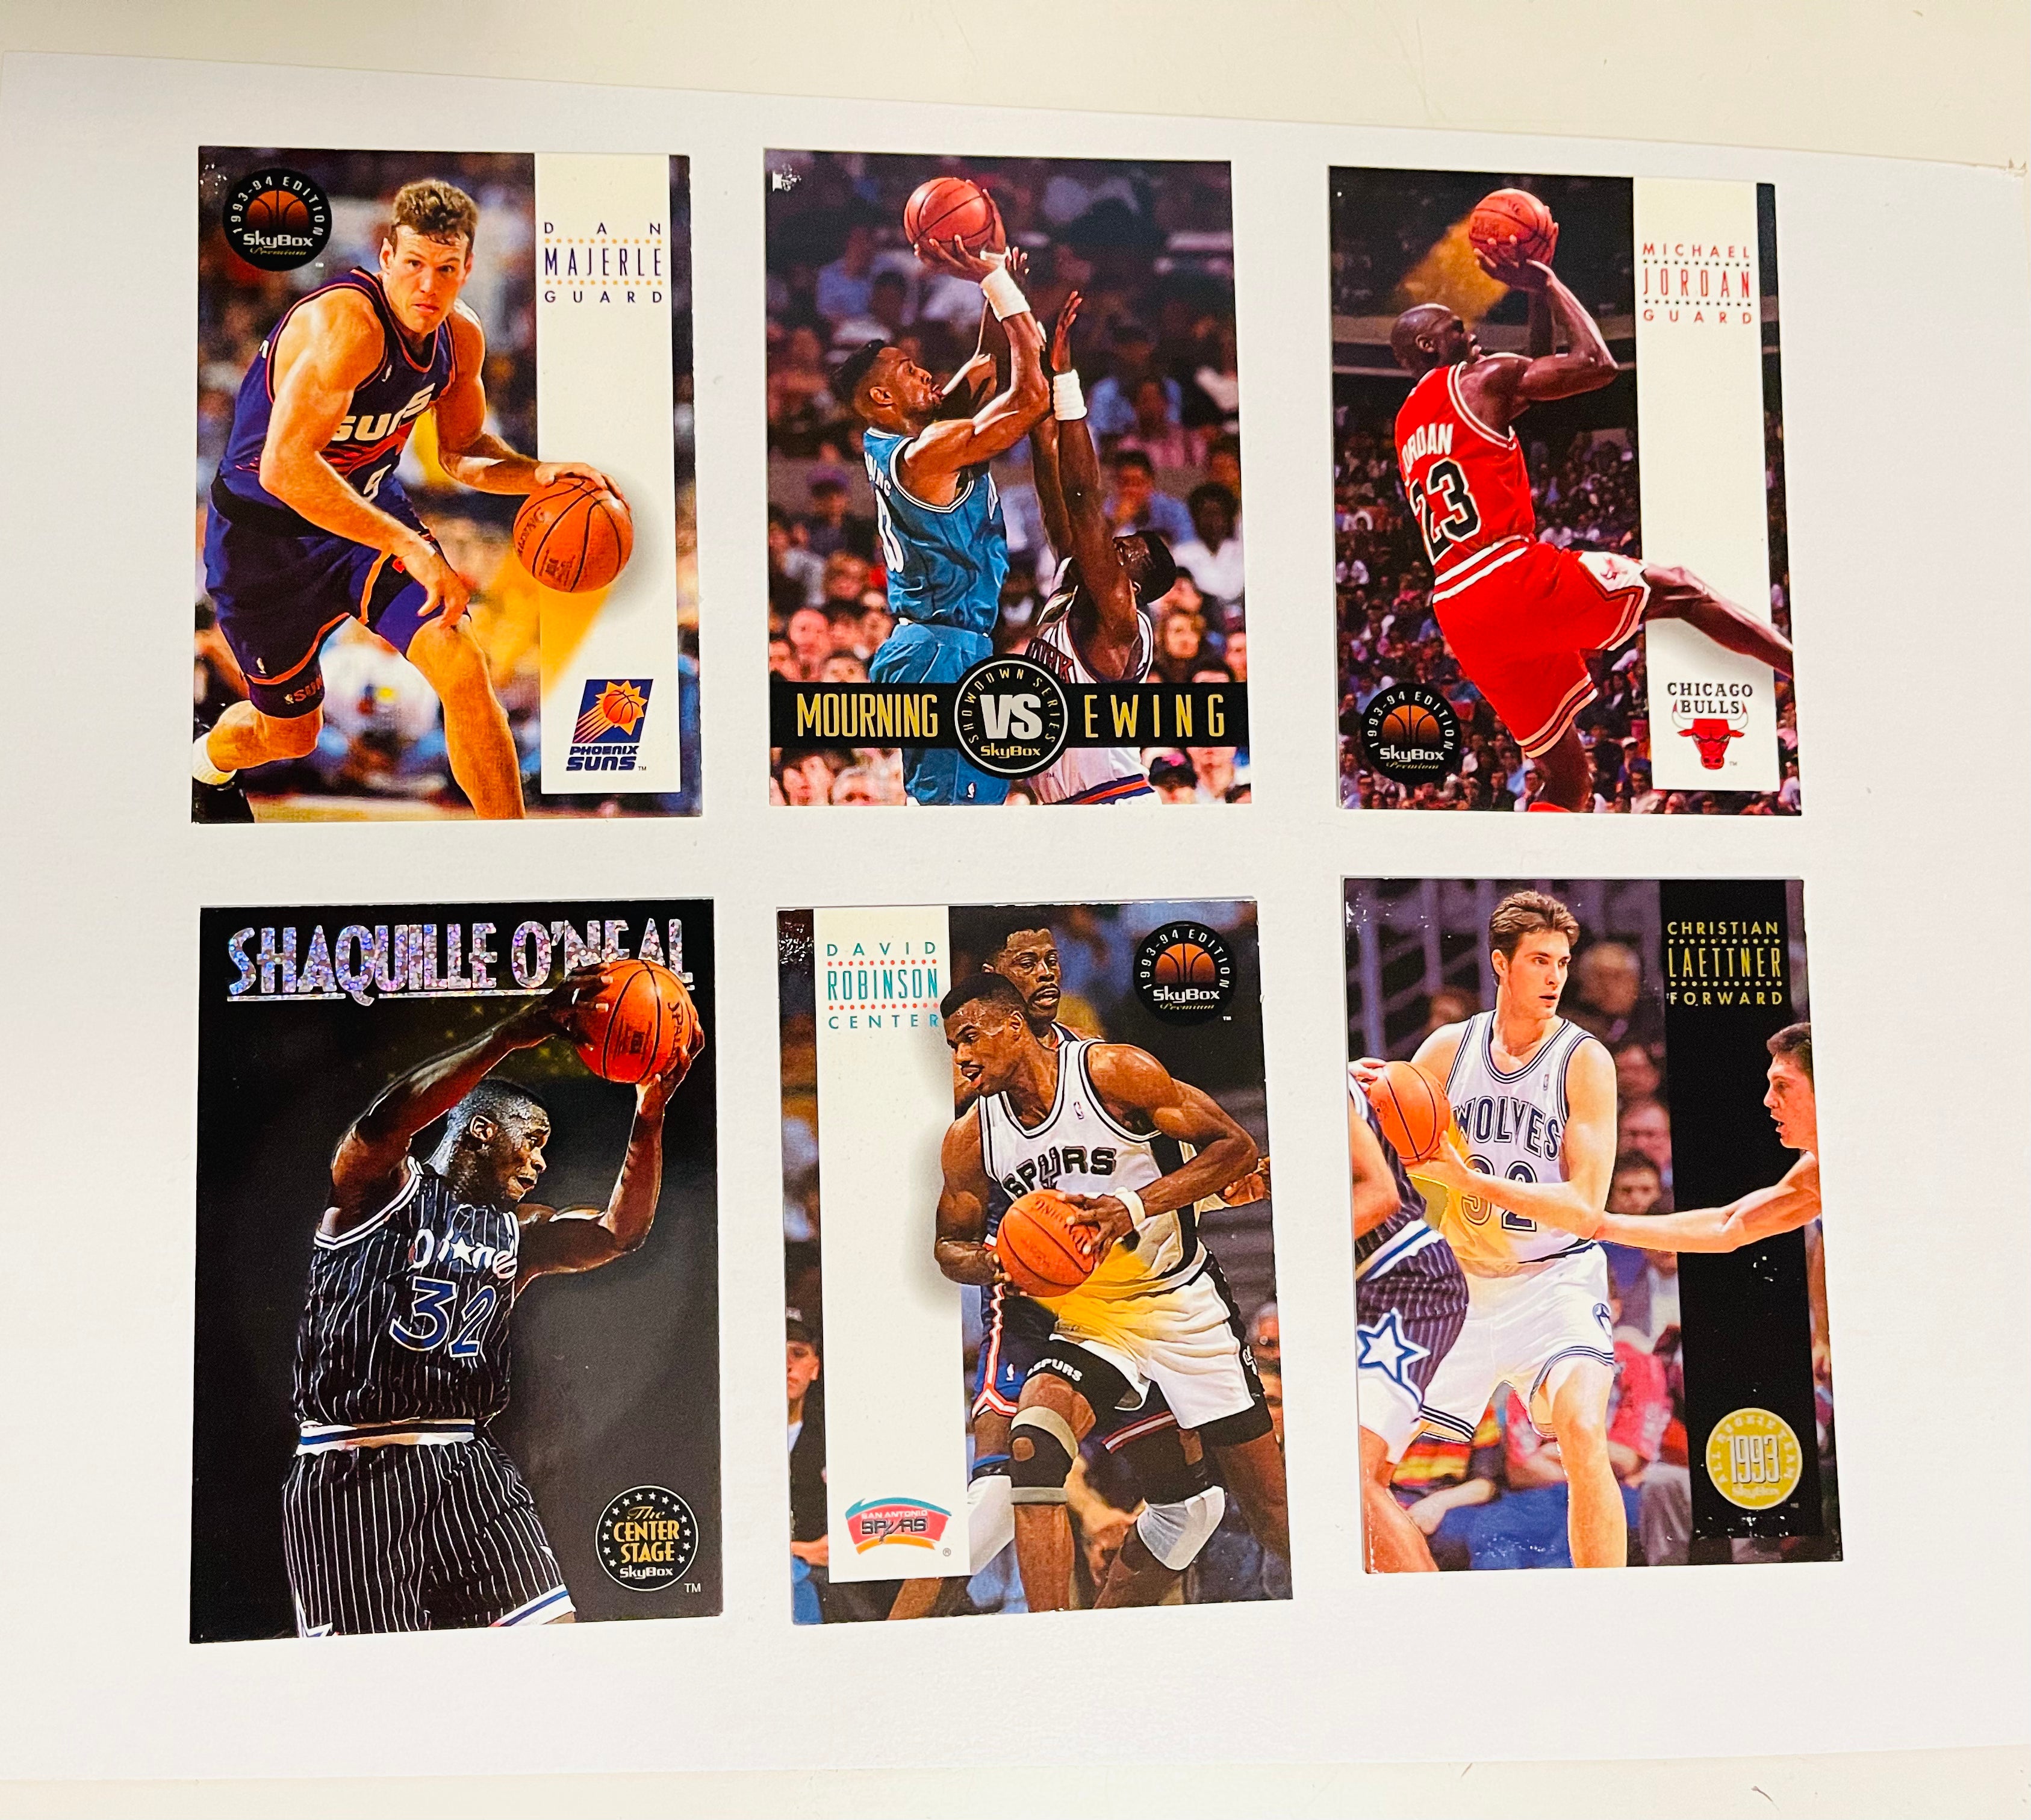 Skybox preview basketball cards set with Jordan and Shaq 1993